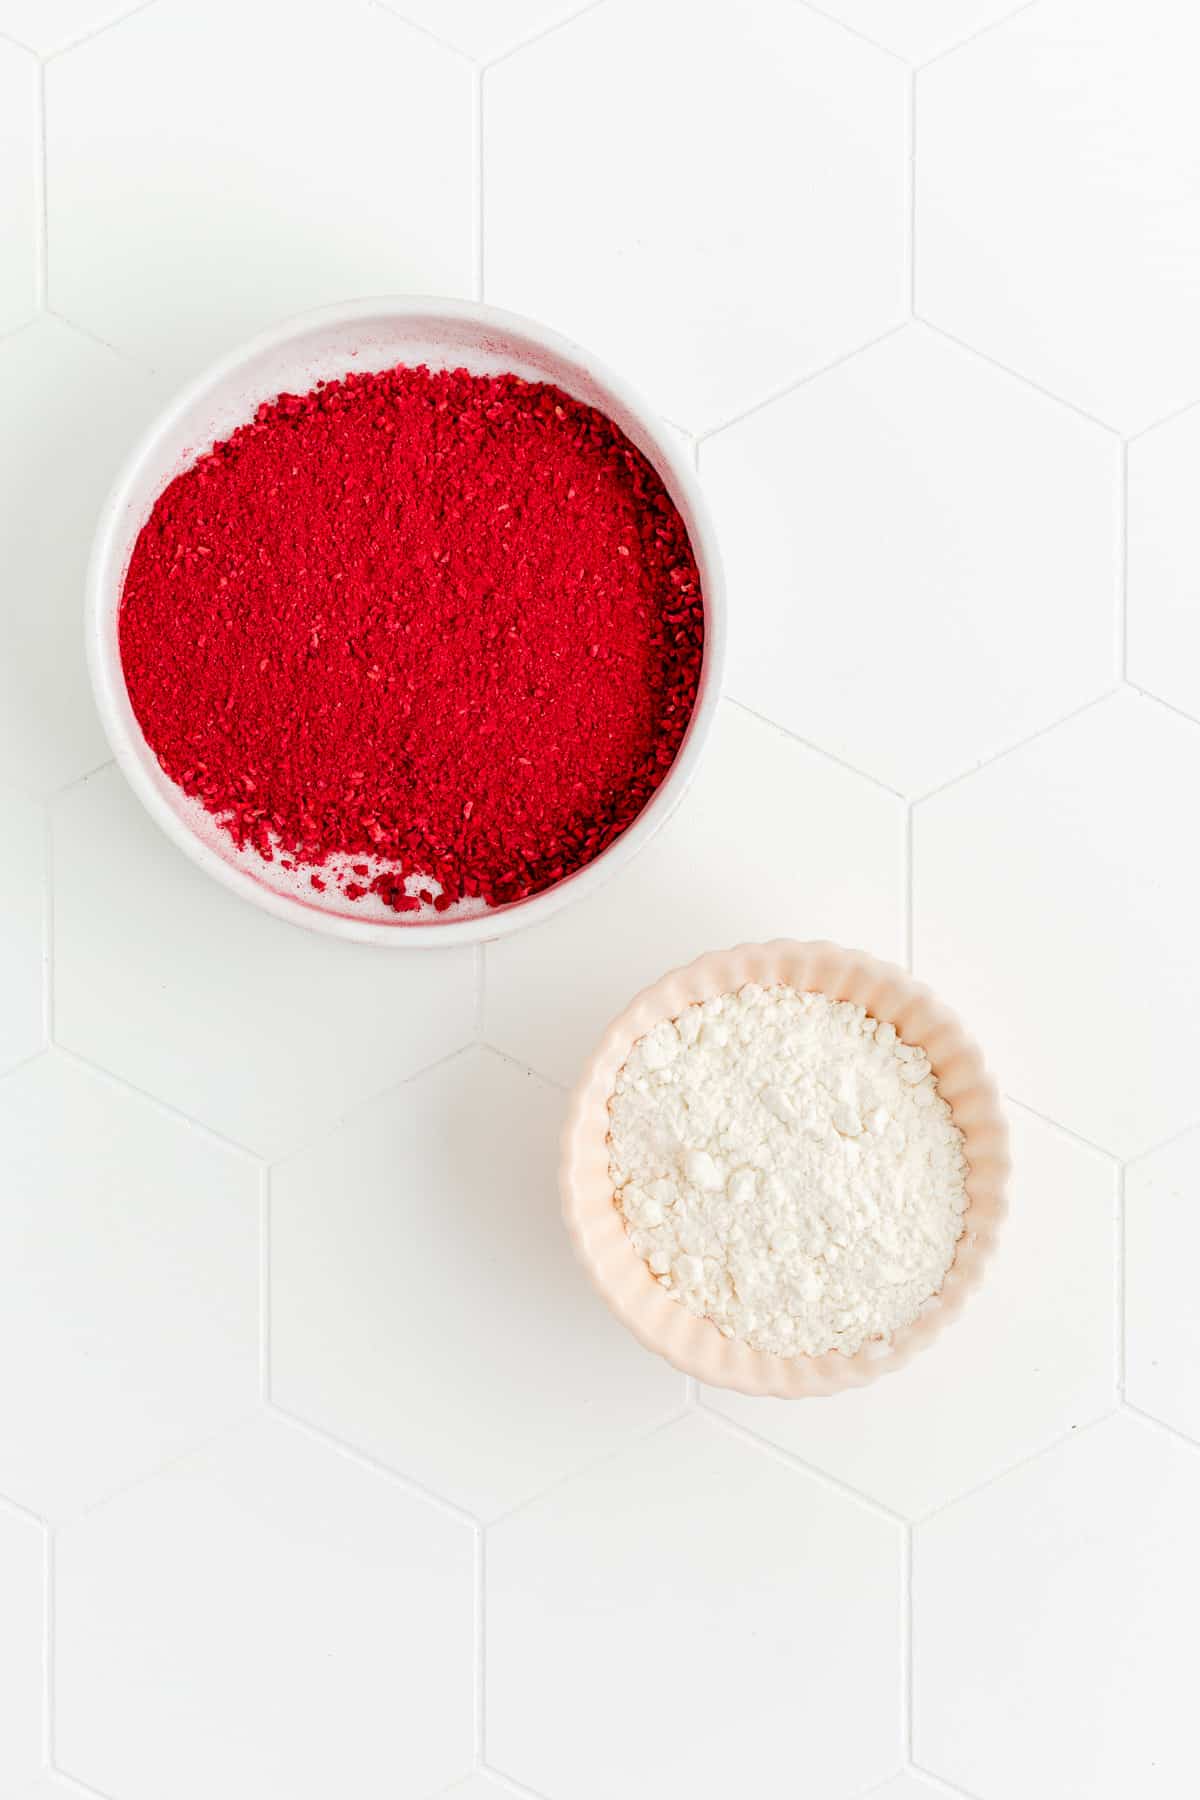 Crushed freeze dried raspberries and flour in individual bowls on white background.